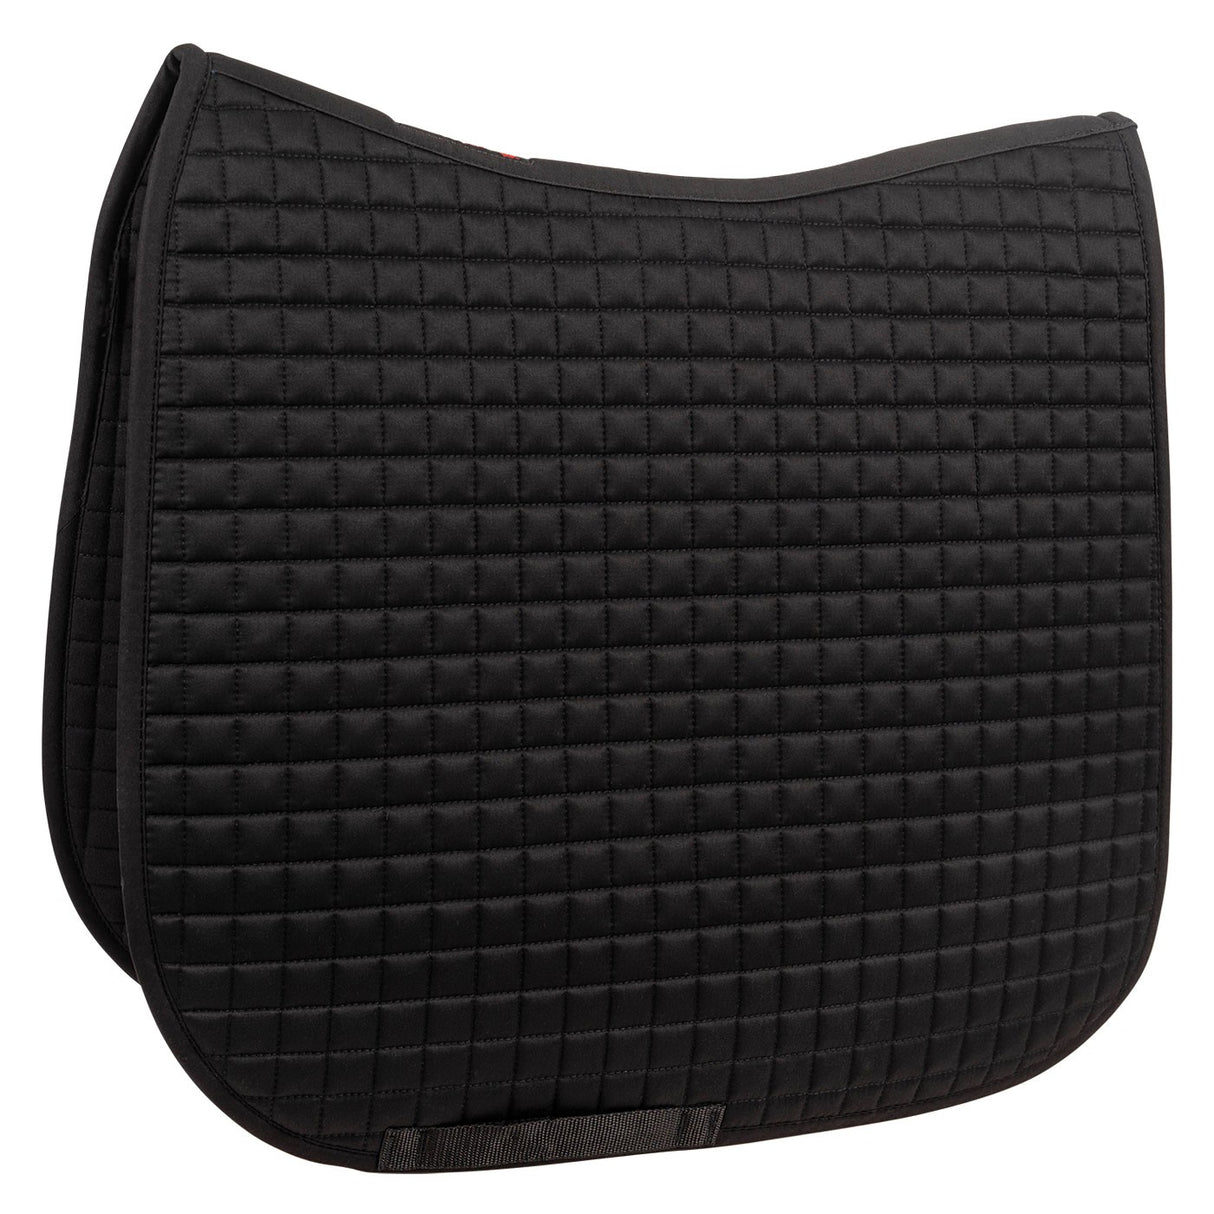 Thermal Therapy Dressage Saddle Pad